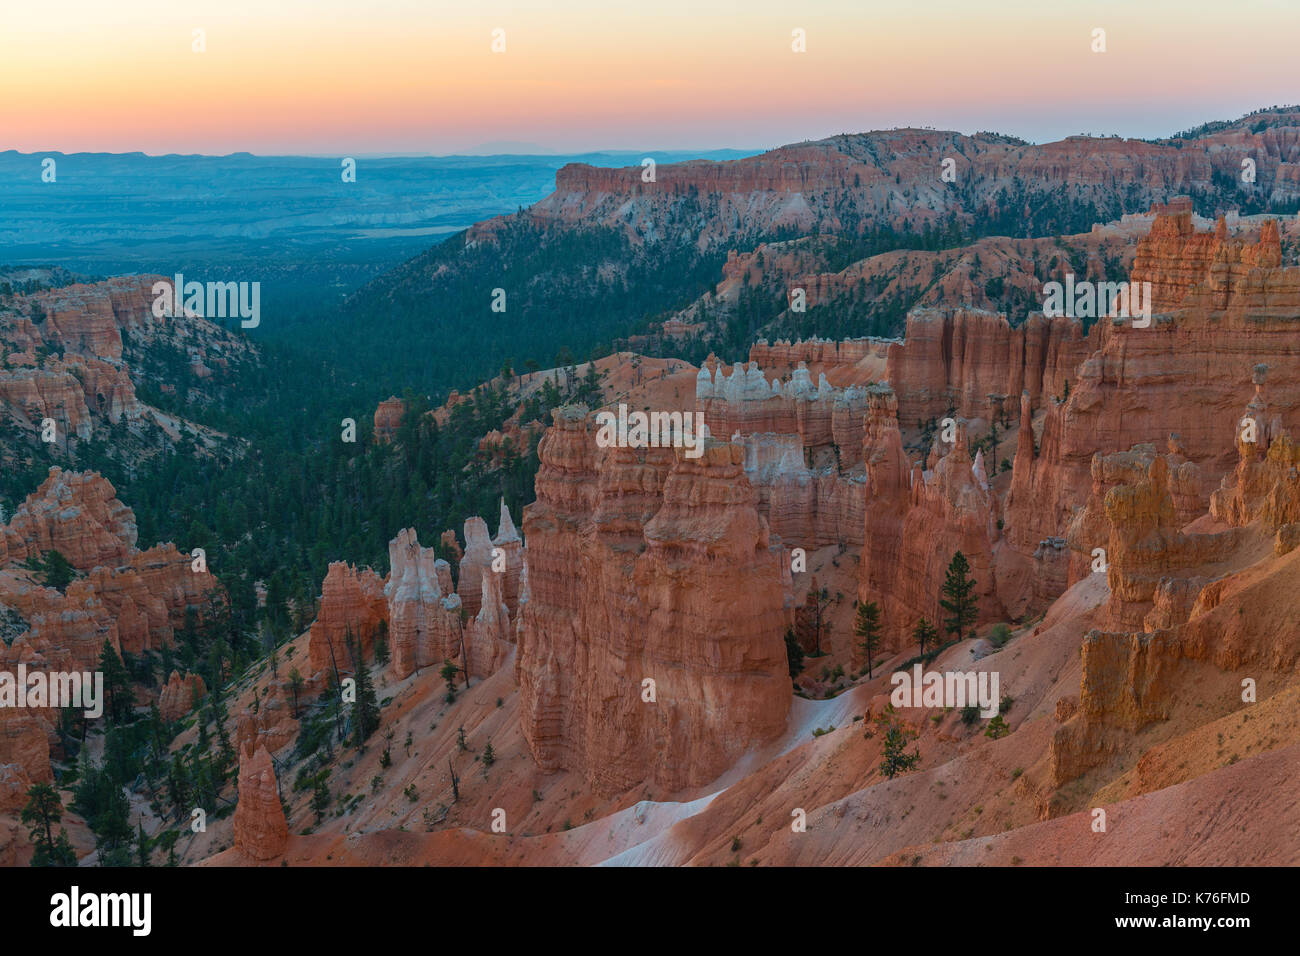 Sunrise with the hoodoo geological formations and forest of Bryce Canyon national park in Utah, USA. Stock Photo